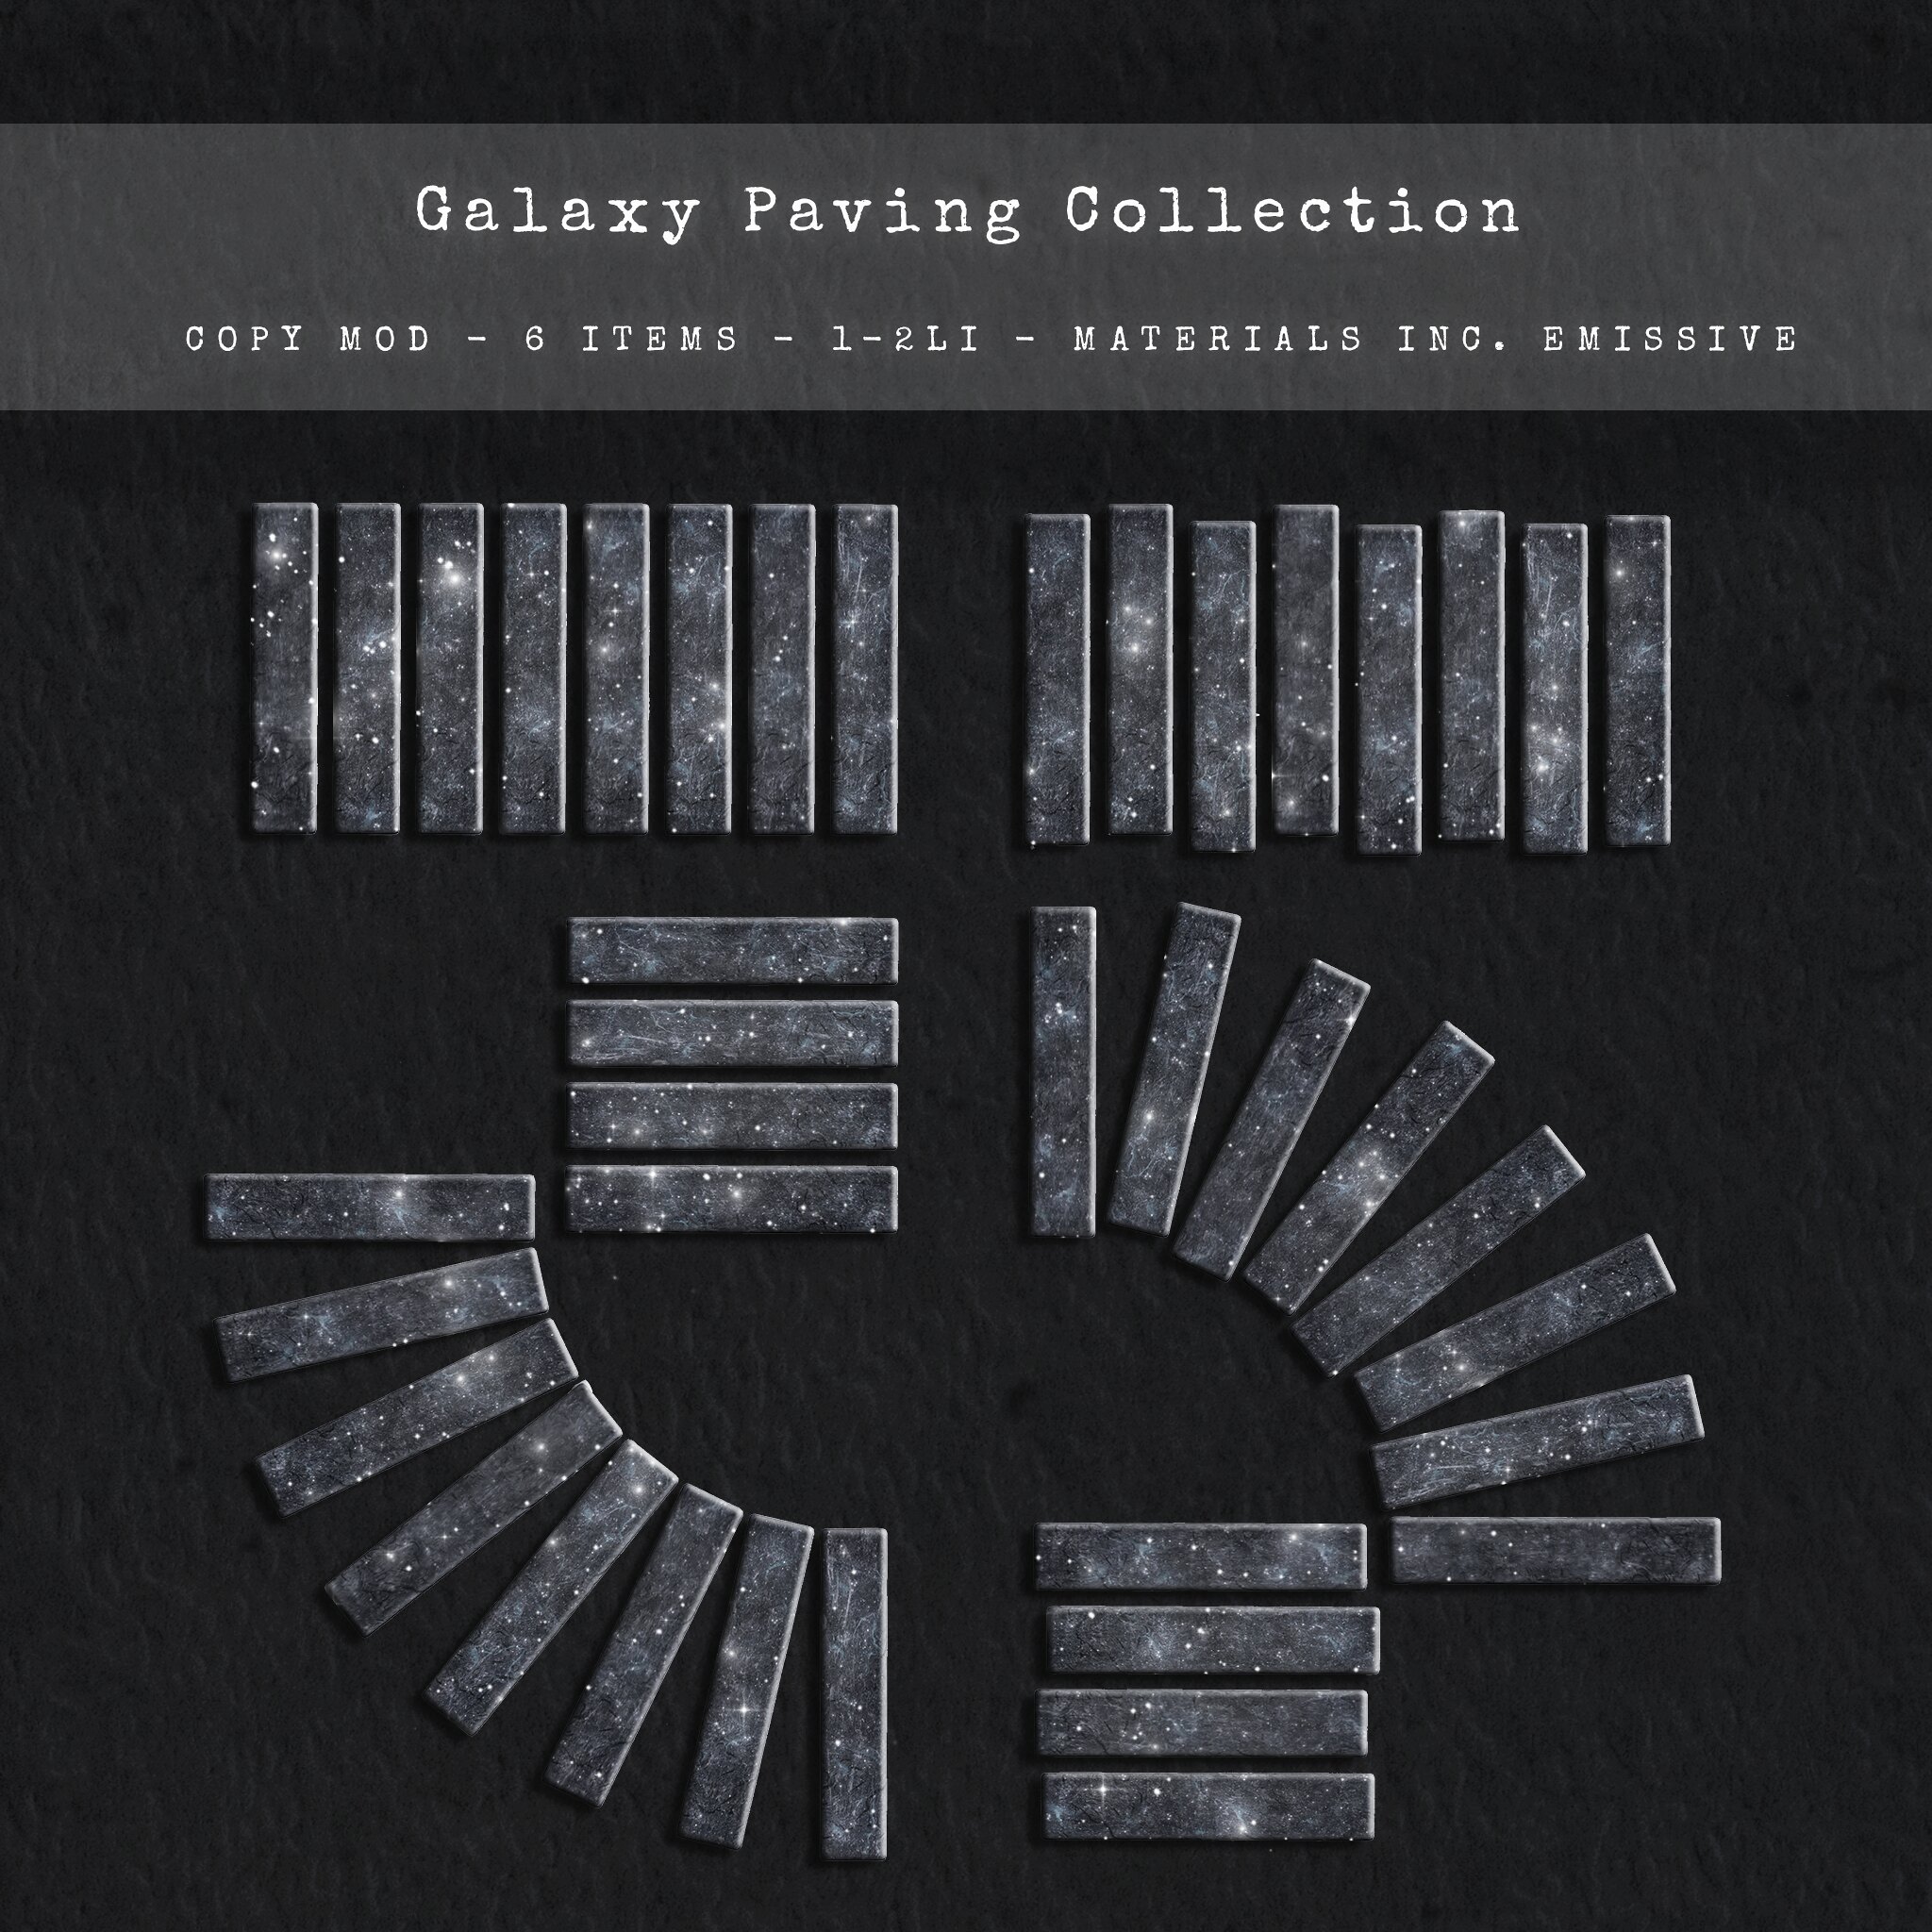 Celeste – Galaxing Paving Collection